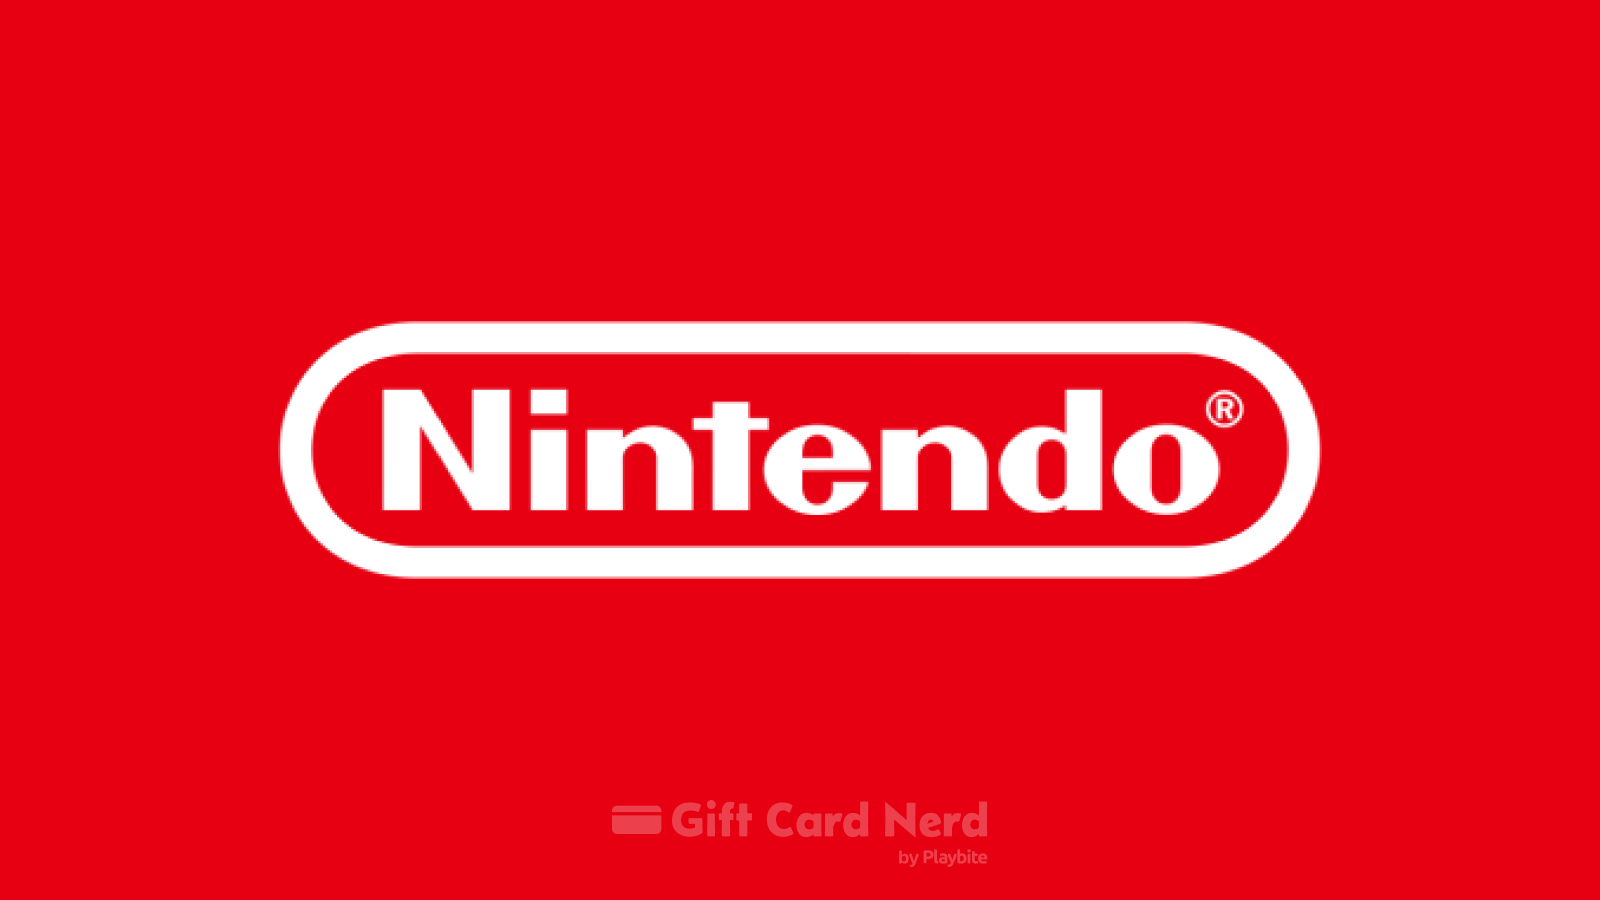 Can I Use a Nintendo Gift Card on Postmates?